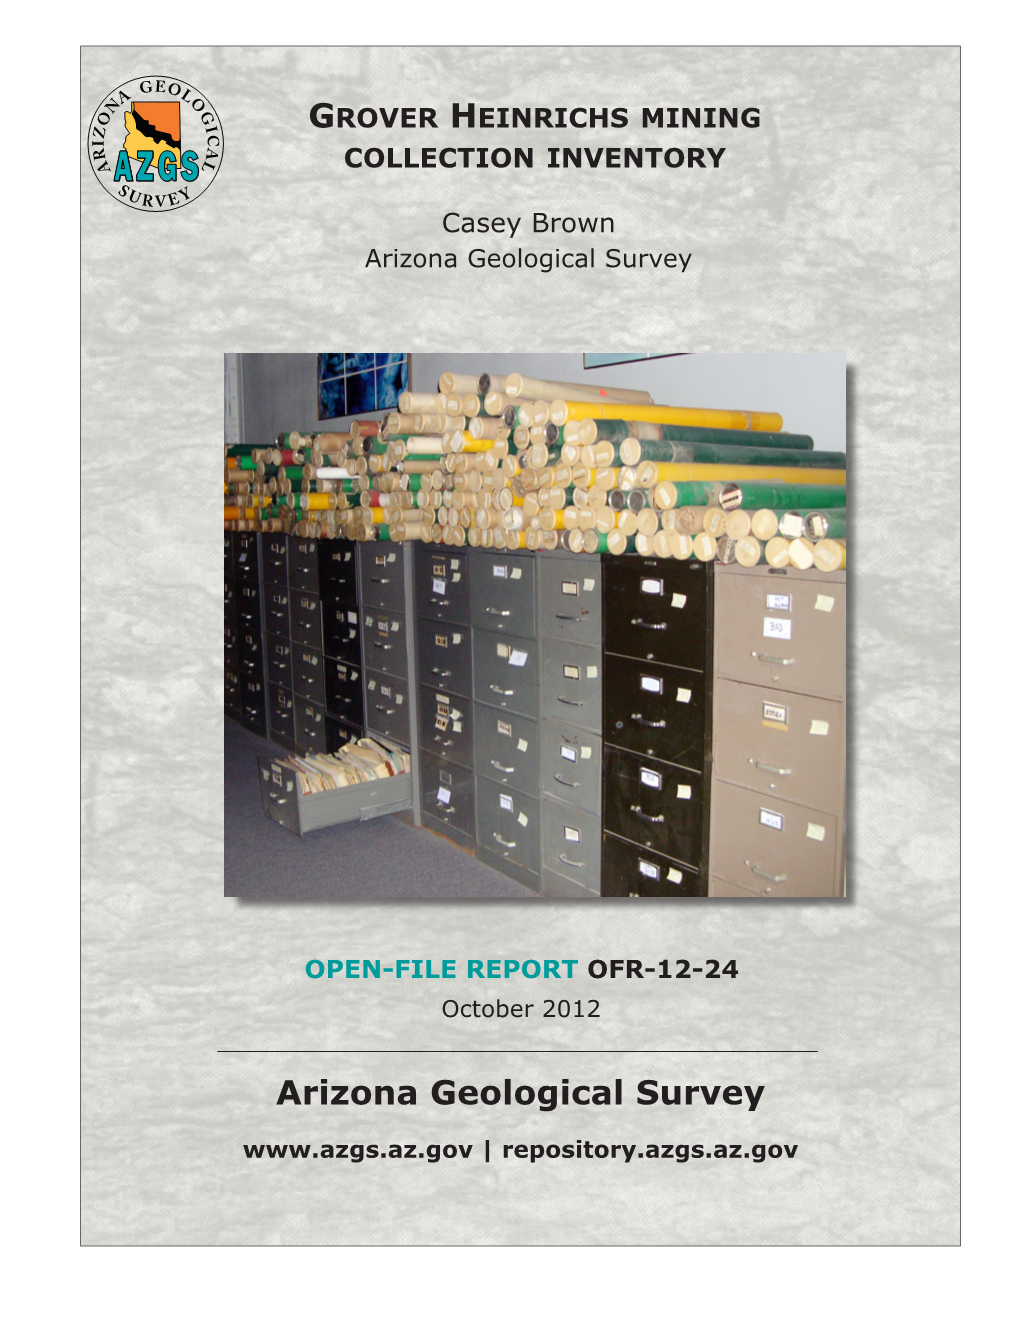 Grover Heinrichs Mining Collection Inventory